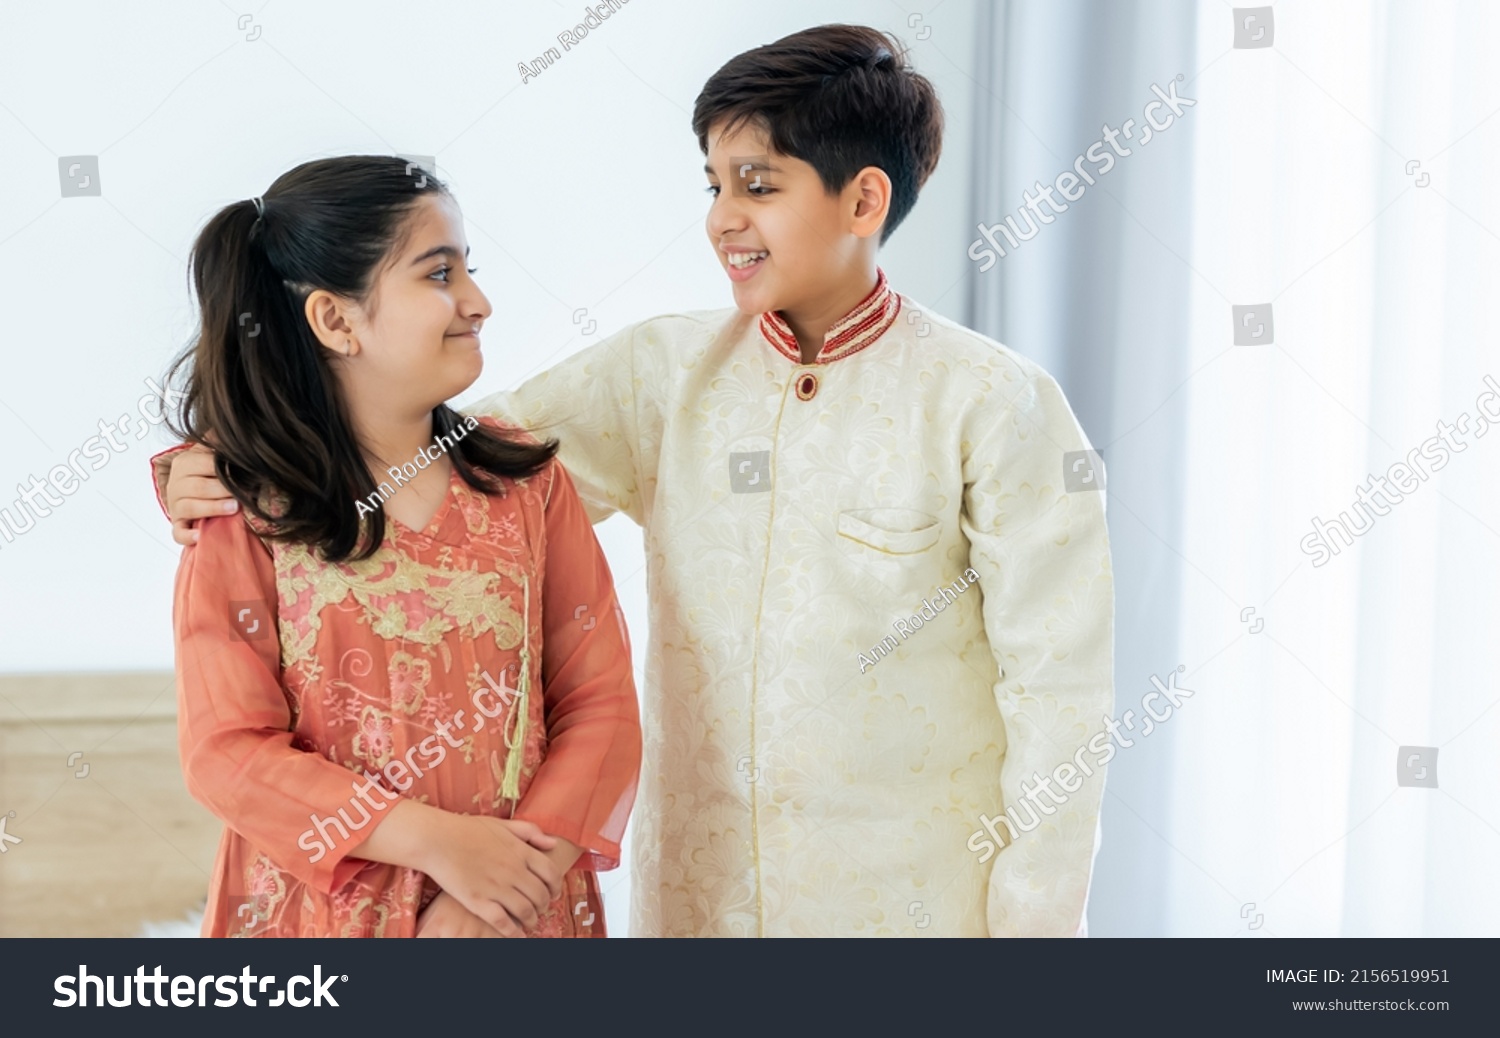 Portrait two people Indian siblings, brother, sister hugging with warmth, love, wearing traditional clothes, smiling with happiness in cozy indoor home. Family, Education, Lifestyle Concept #2156519951